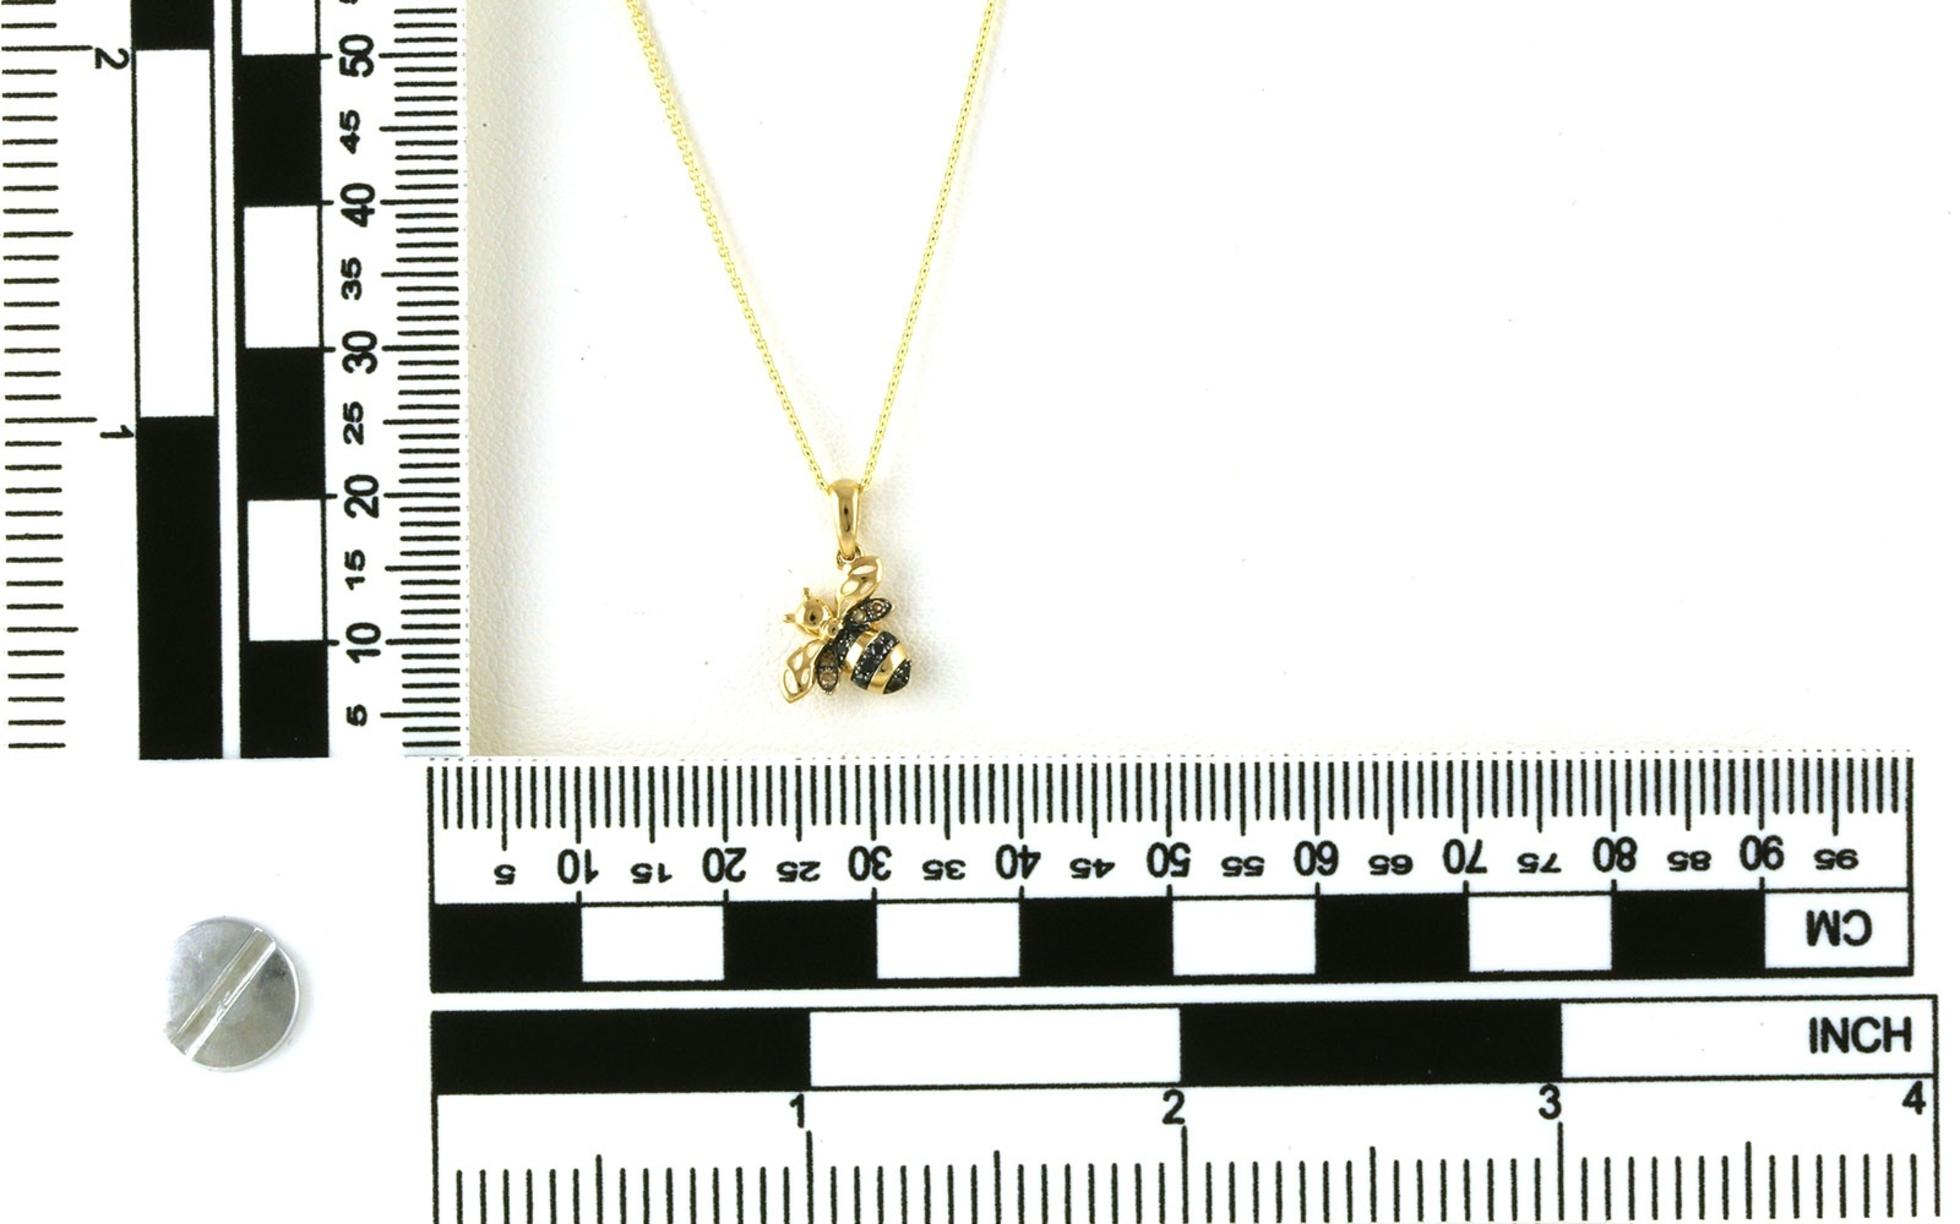 Bumblebee Black Diamond Necklace in Yellow Gold (0.07cts TWT) Scale